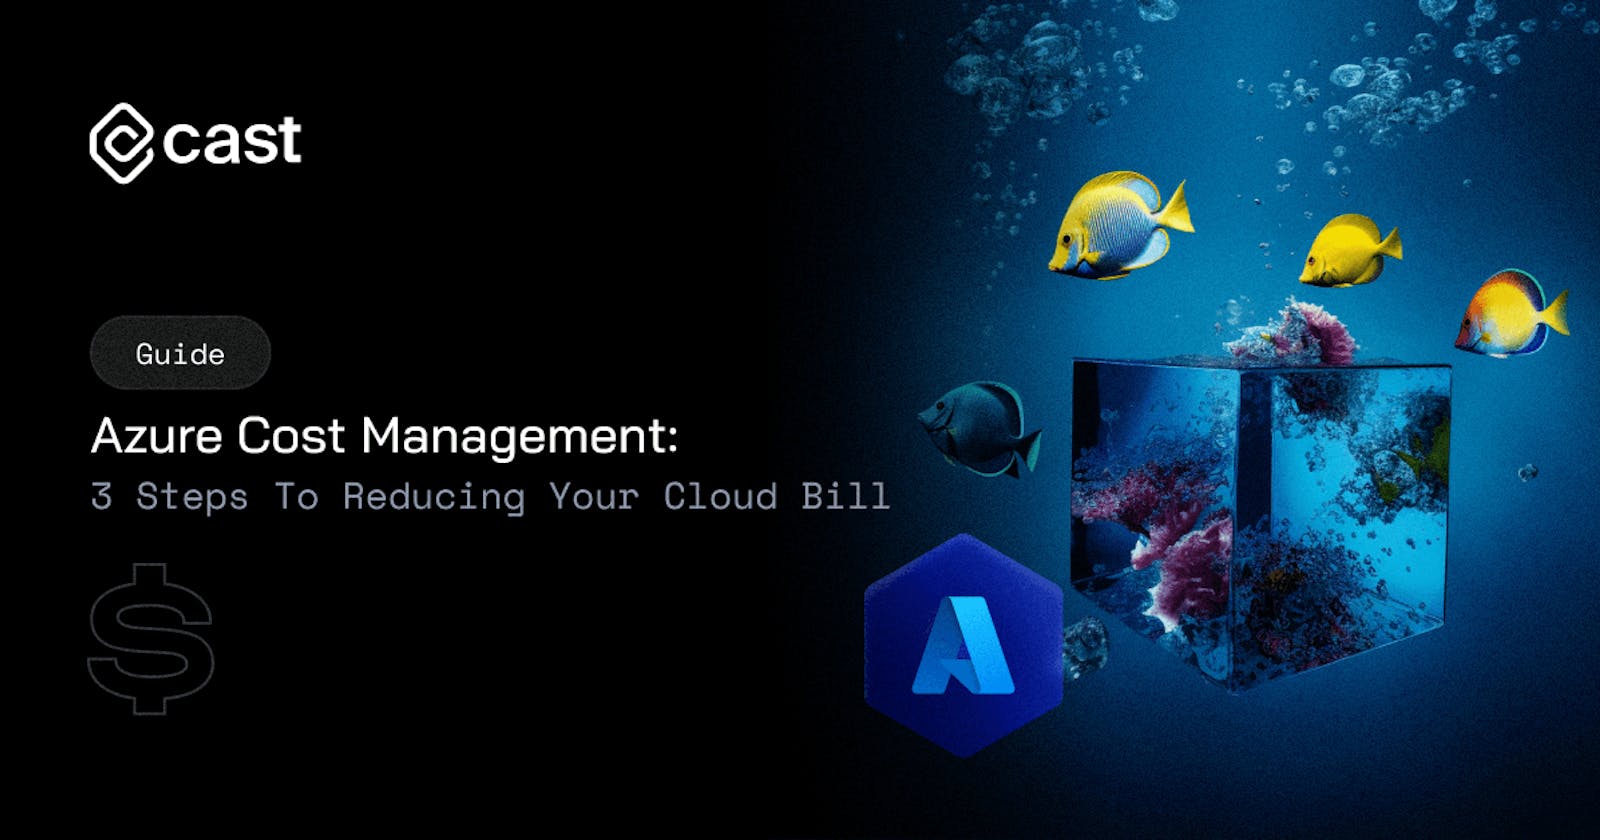 Azure Cost Management Guide: 3 Steps To Reducing Your Cloud Bill